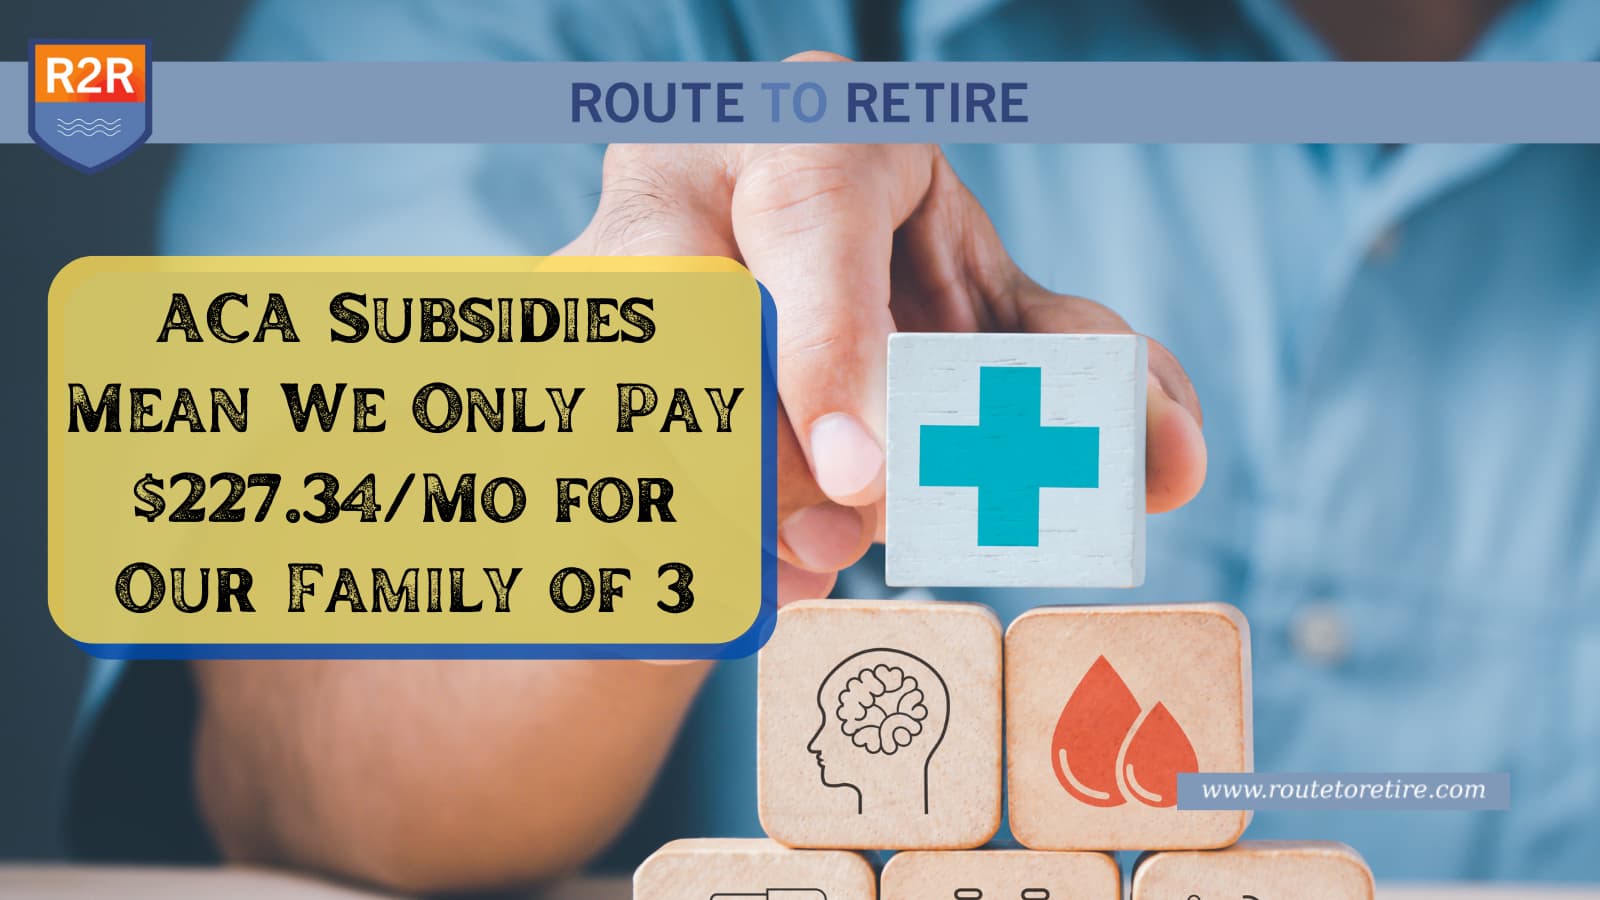 ACA Subsidies Mean We Only Pay $227.34/Mo for Our Family of 3